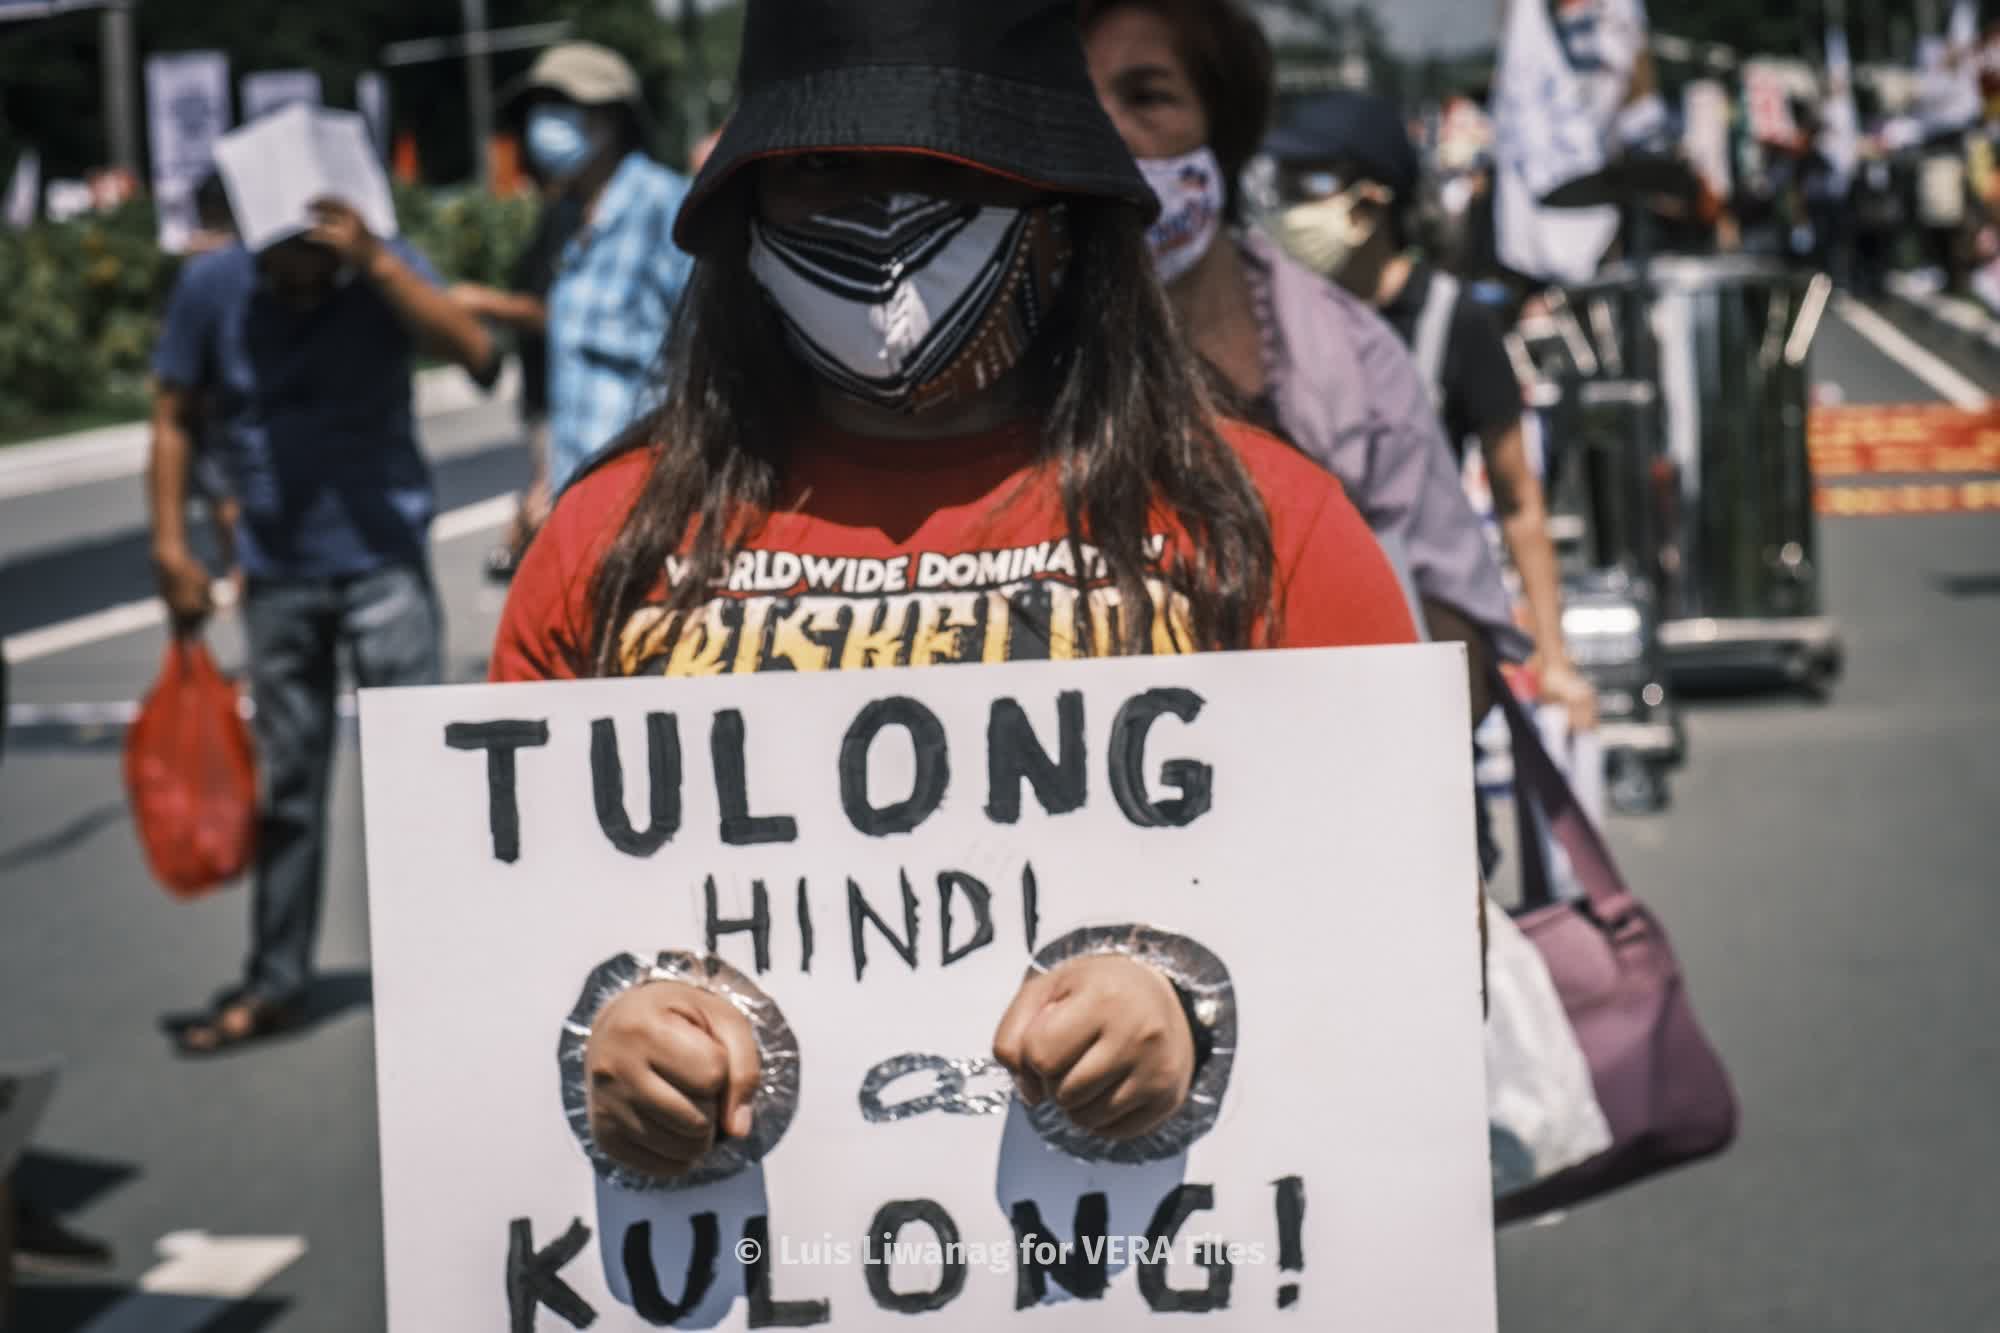 Despite ban, voices of dissent ring loud and clear SONA 2020 4/19  Photos by Luis Liwanag